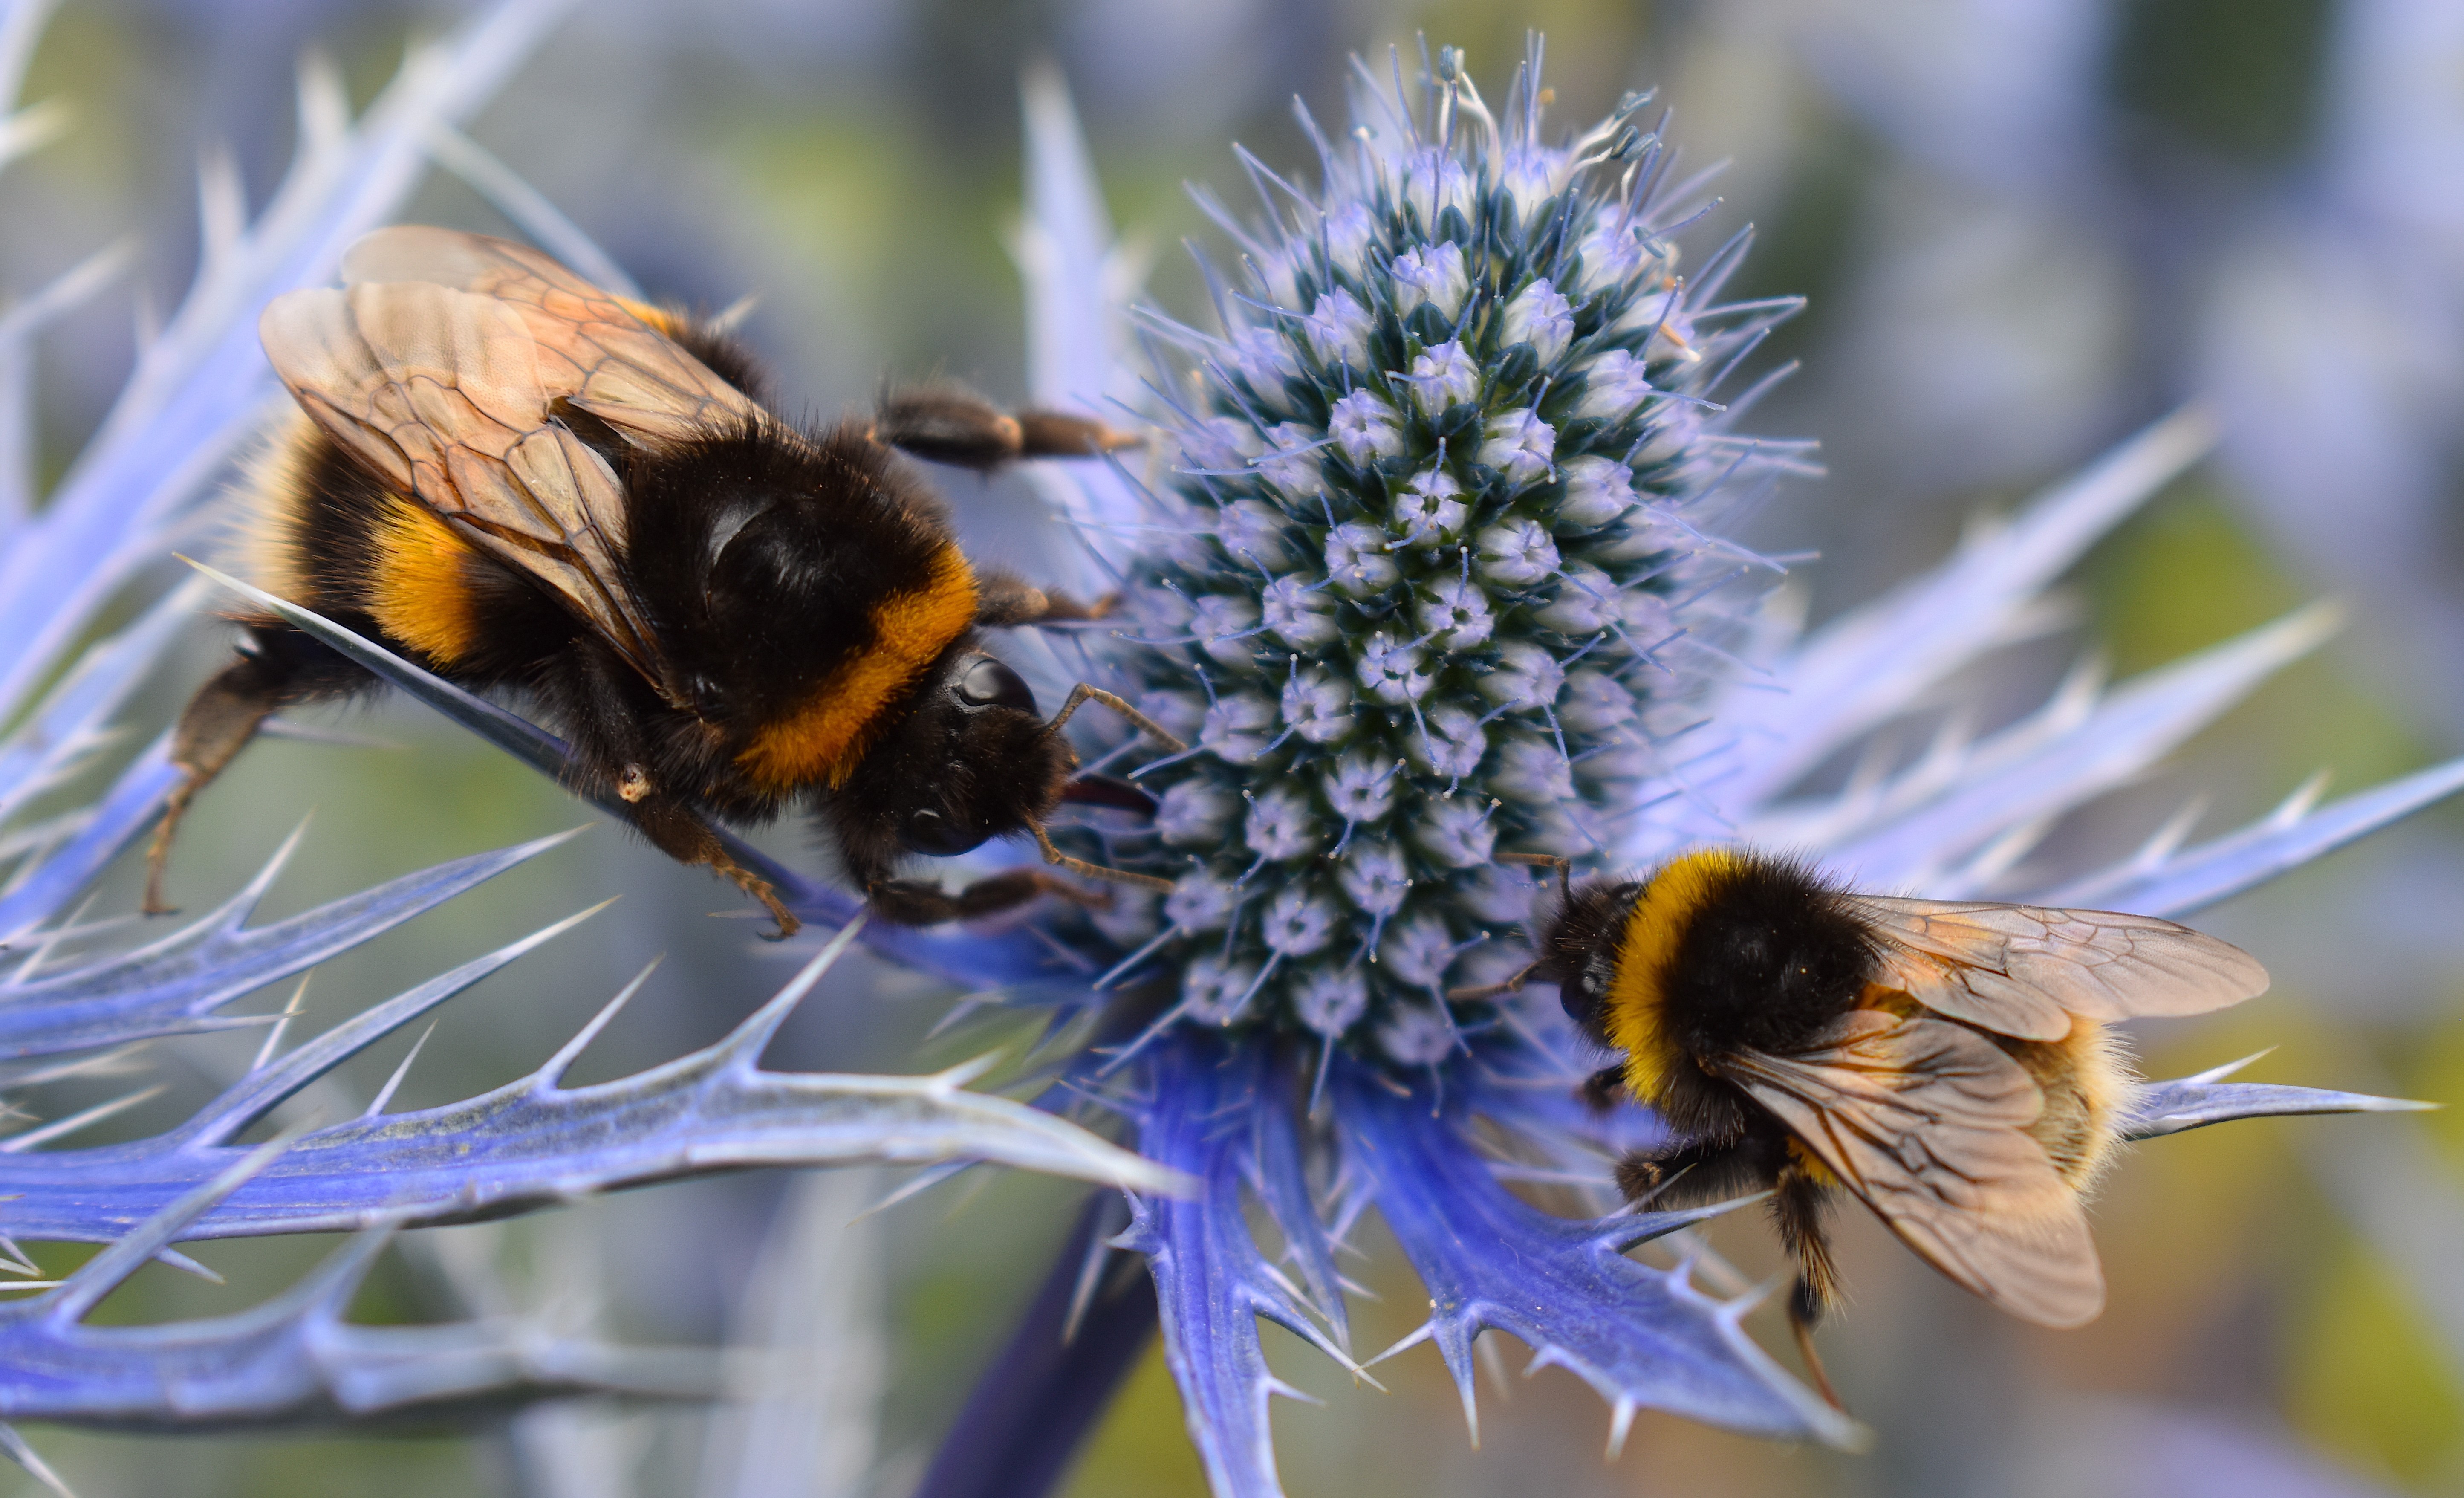 Two honey bees working tocether to collect nectar from a blue eryngium plant.